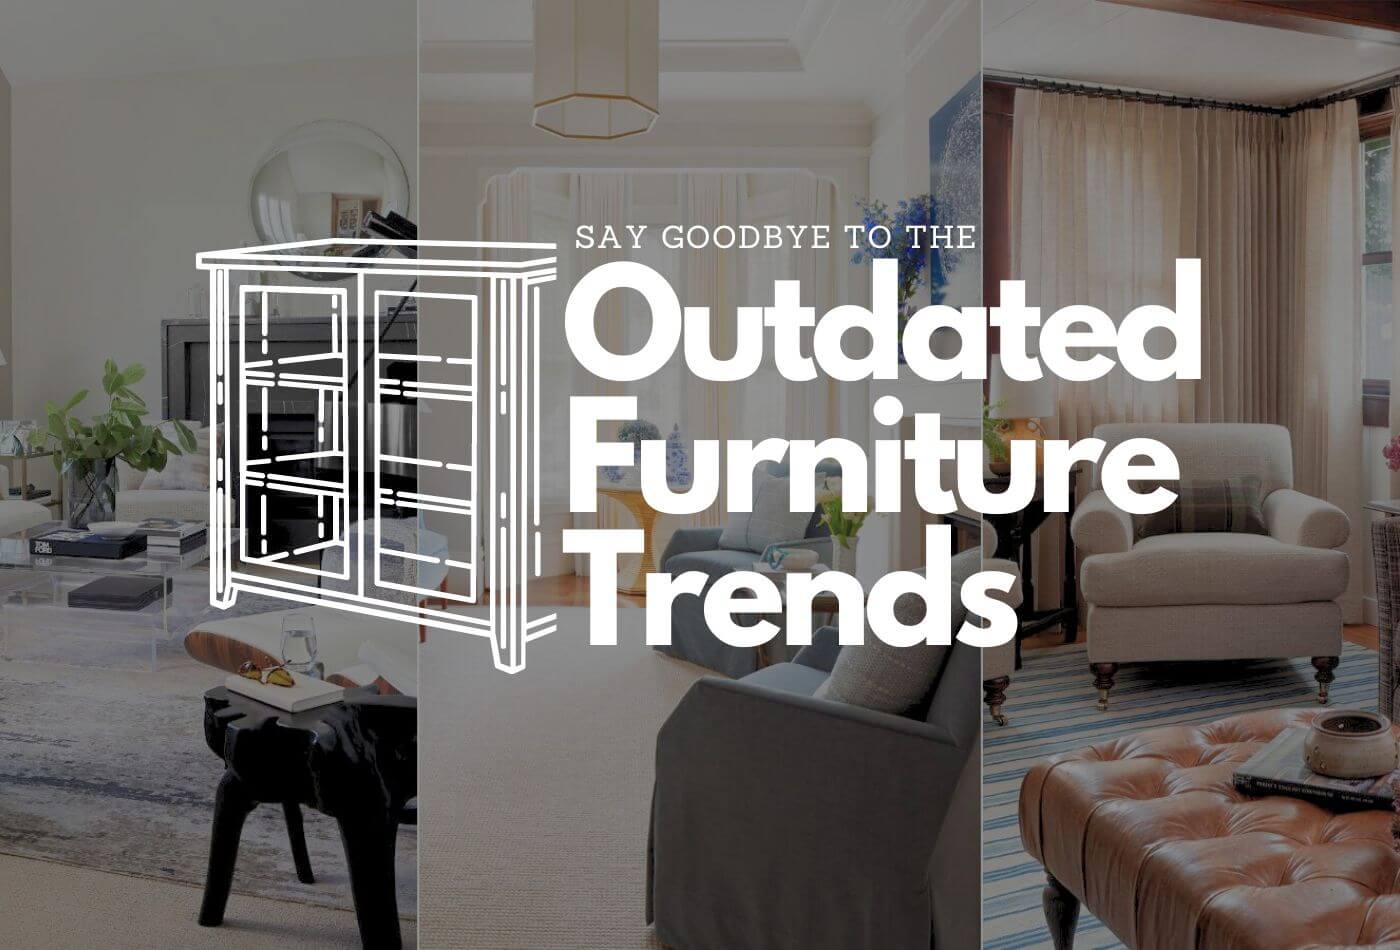 Say Goodbye To The Outdated Furniture Trends!